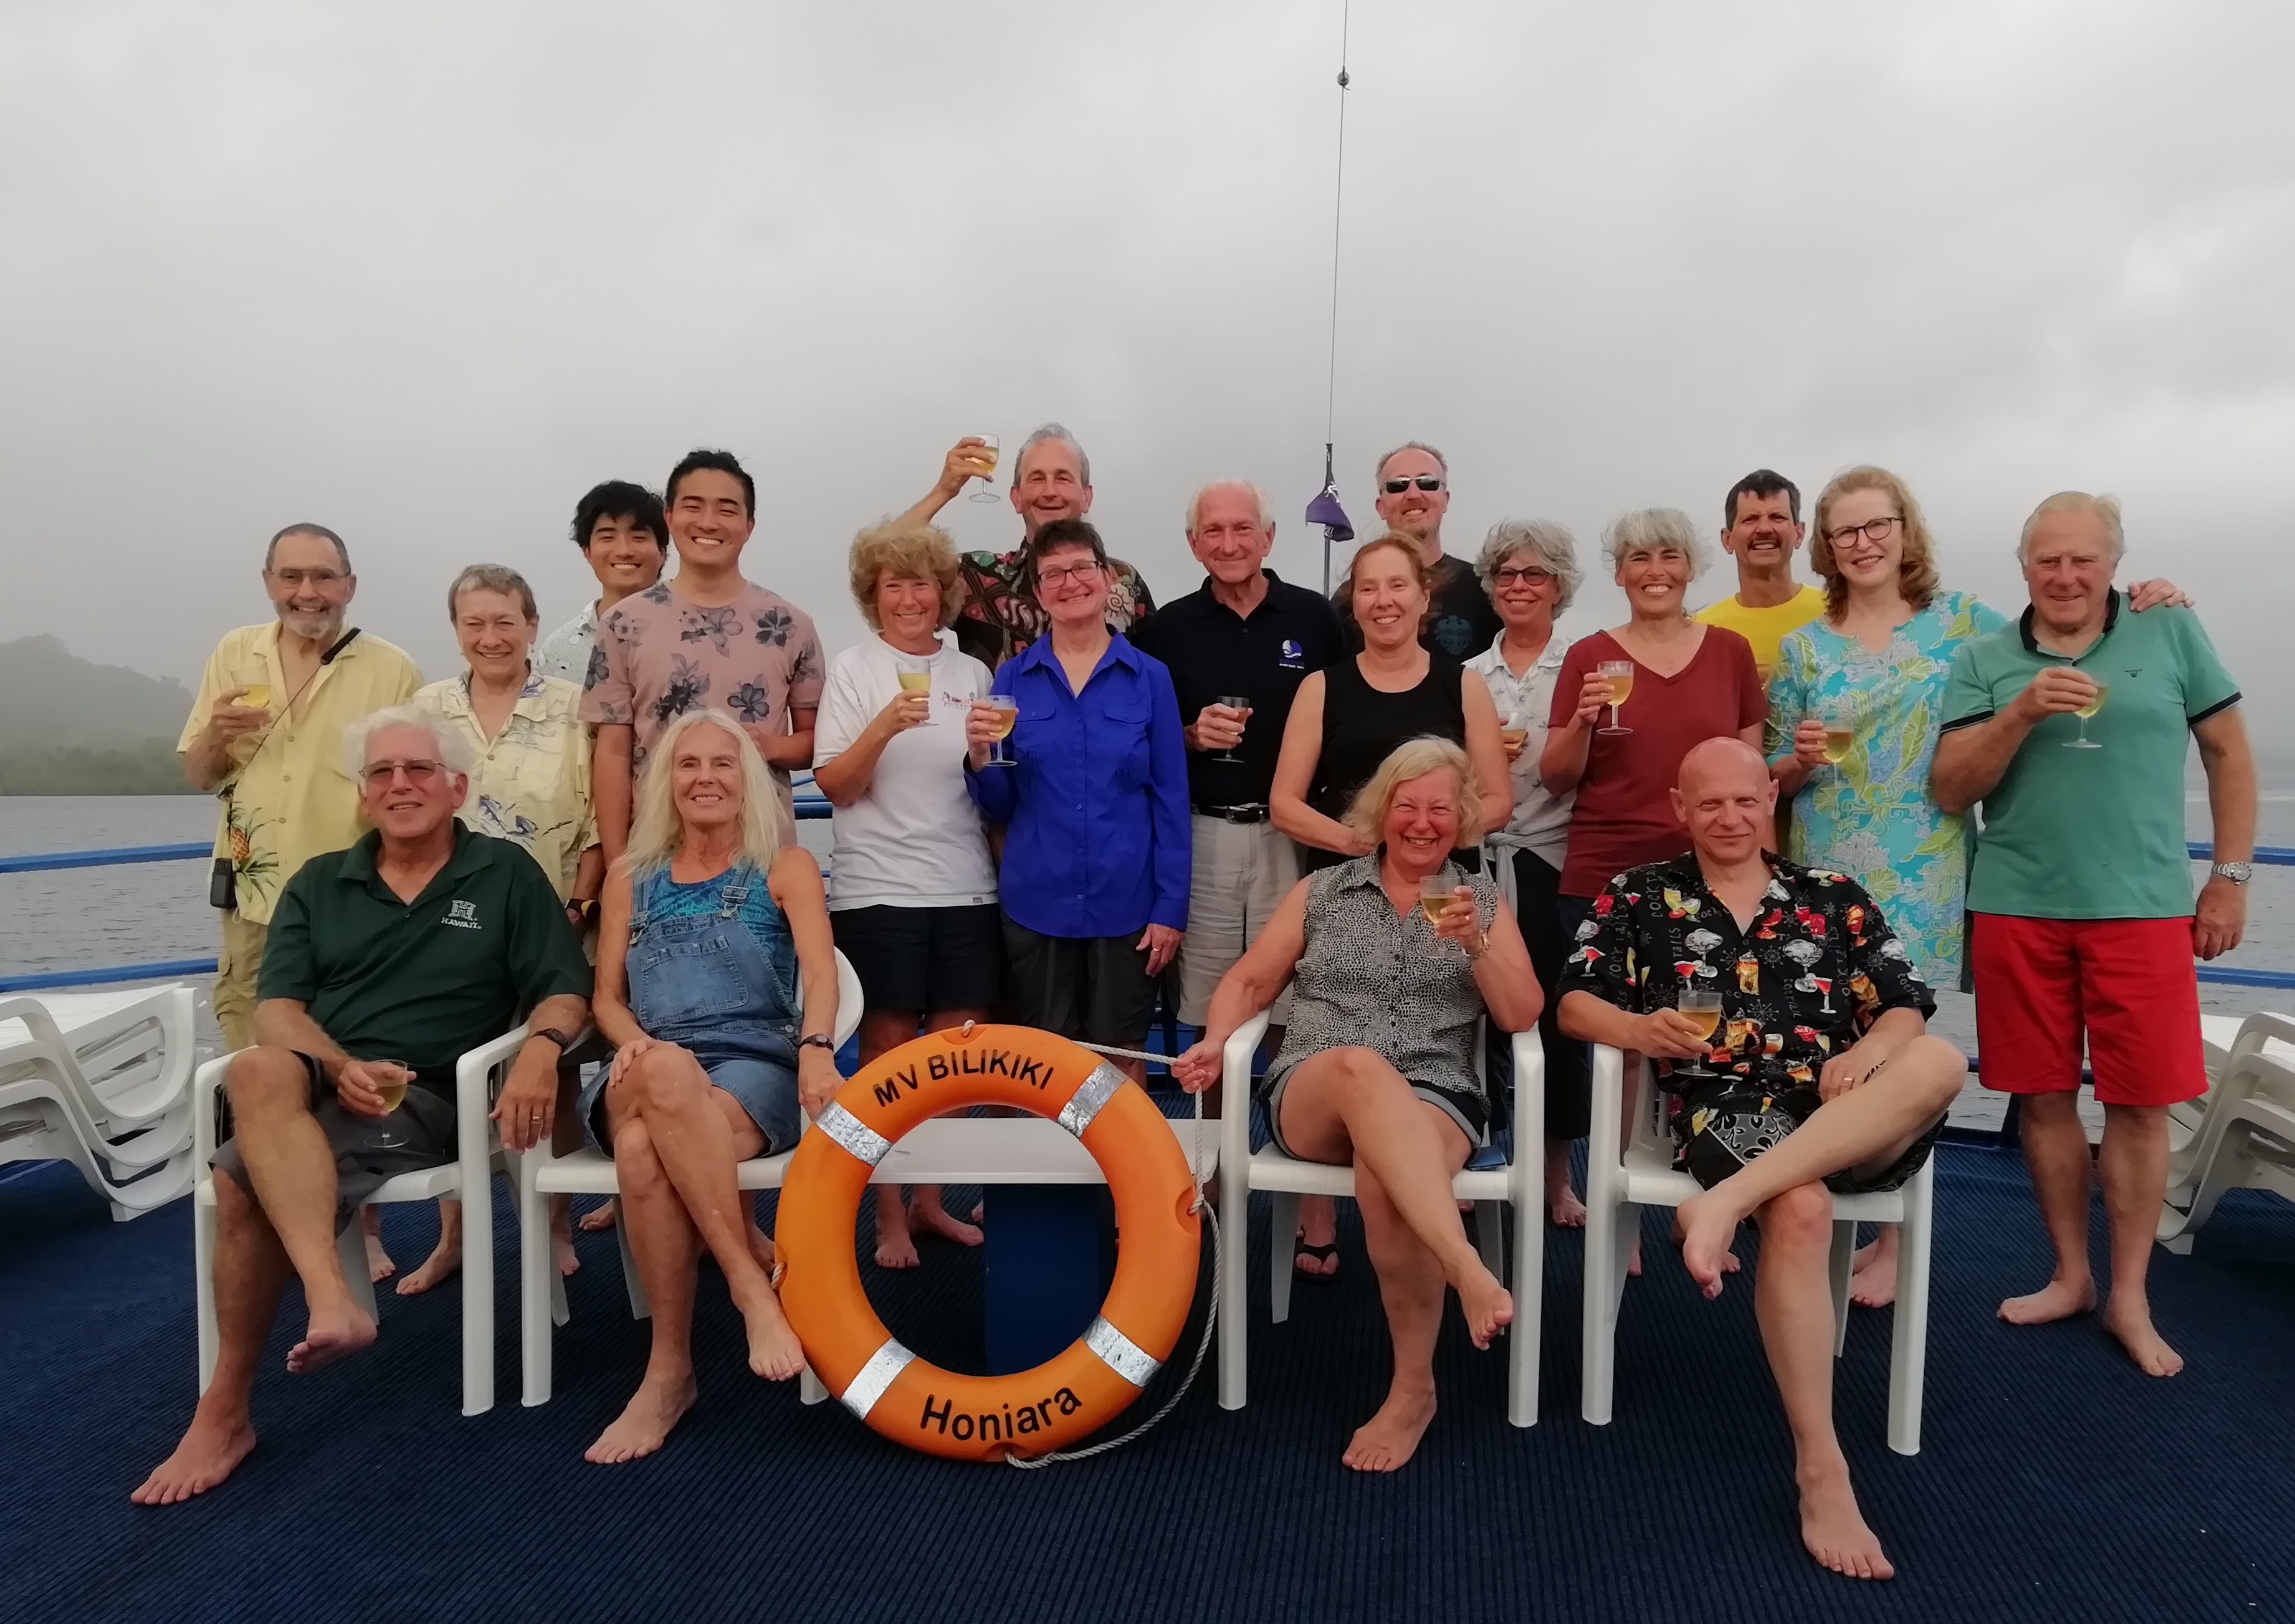 Group photo of the happy divers in the Solomon Islands